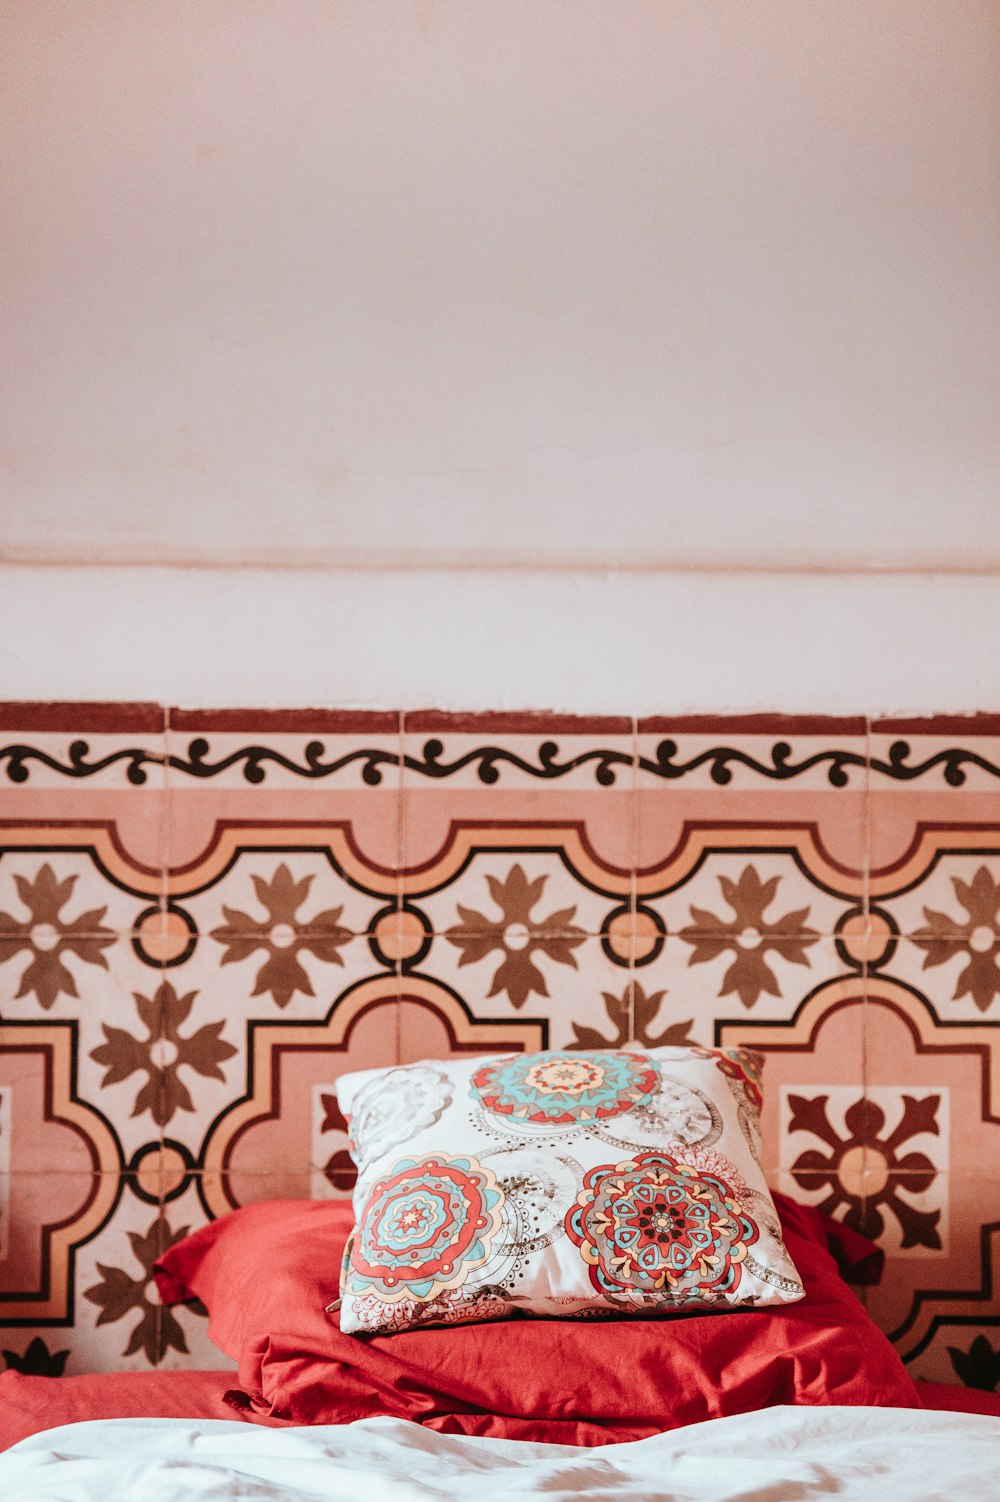 multicolored damask pillow on pink textile